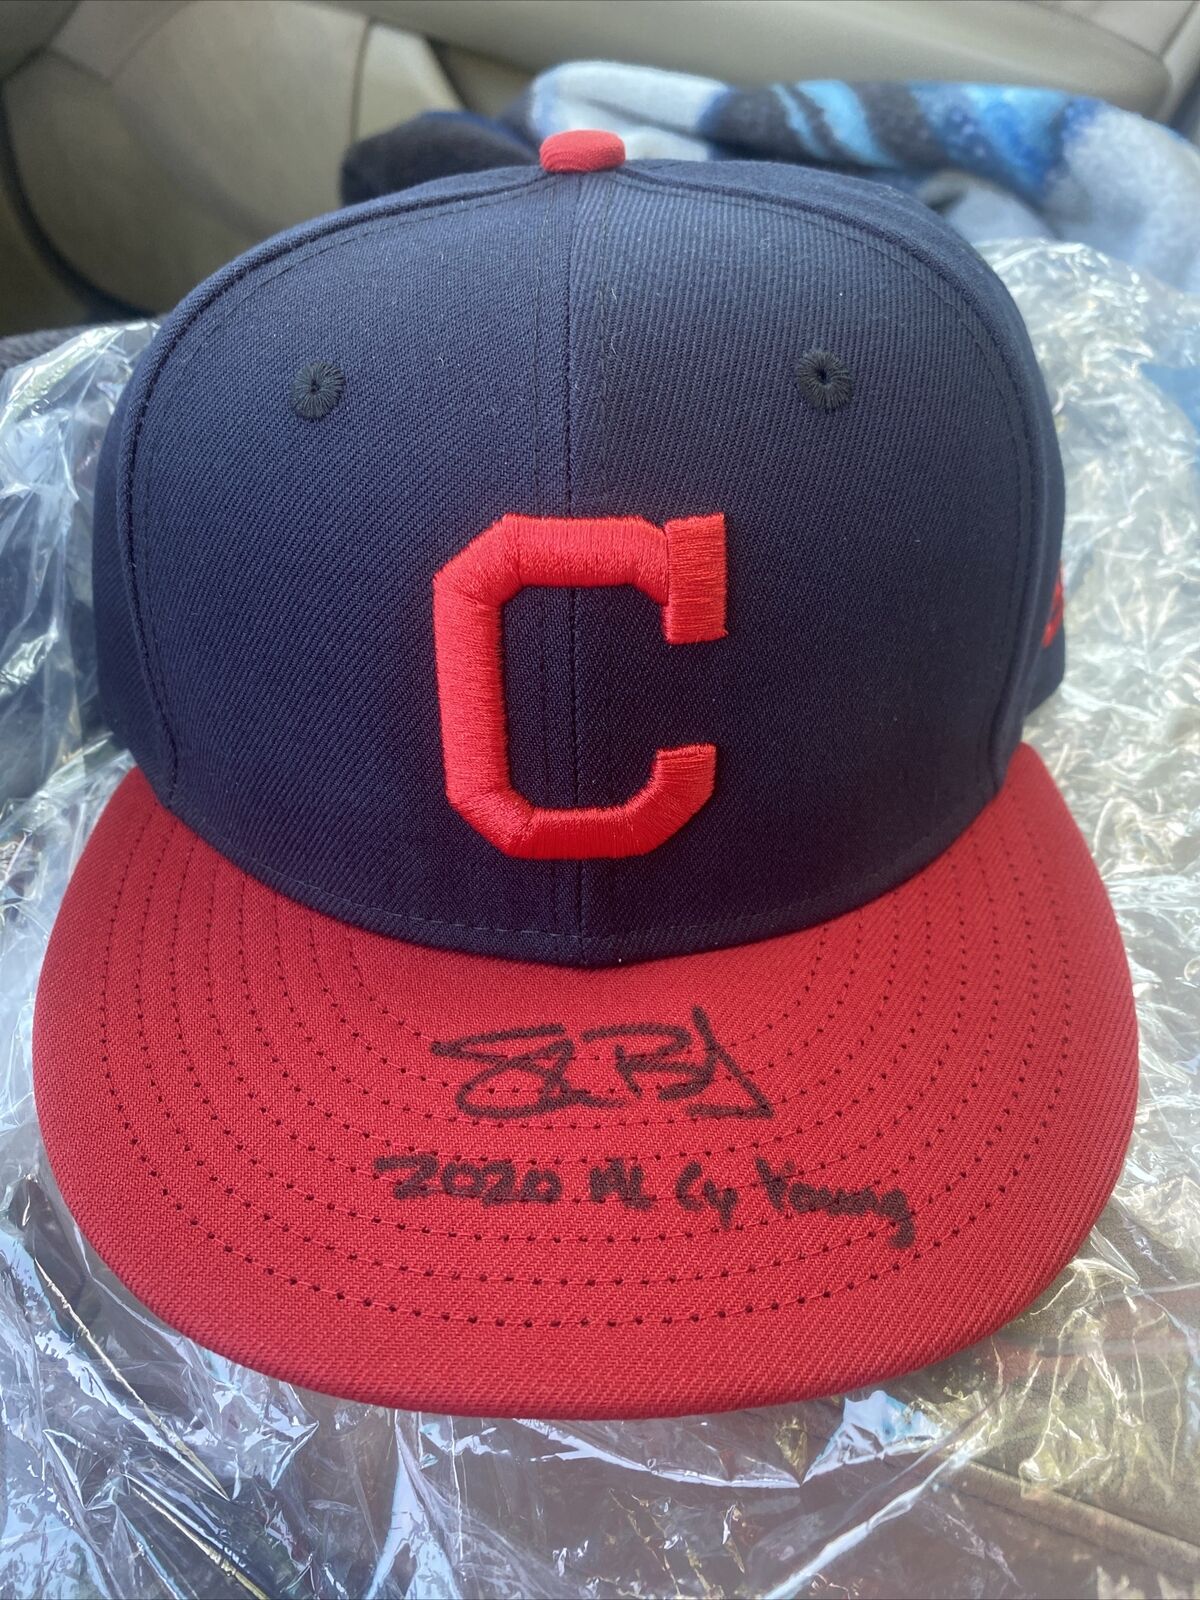 SHANE BIEBER SIGNED HAT “2020 AL CY YOUNG” AUTHENTICATED 